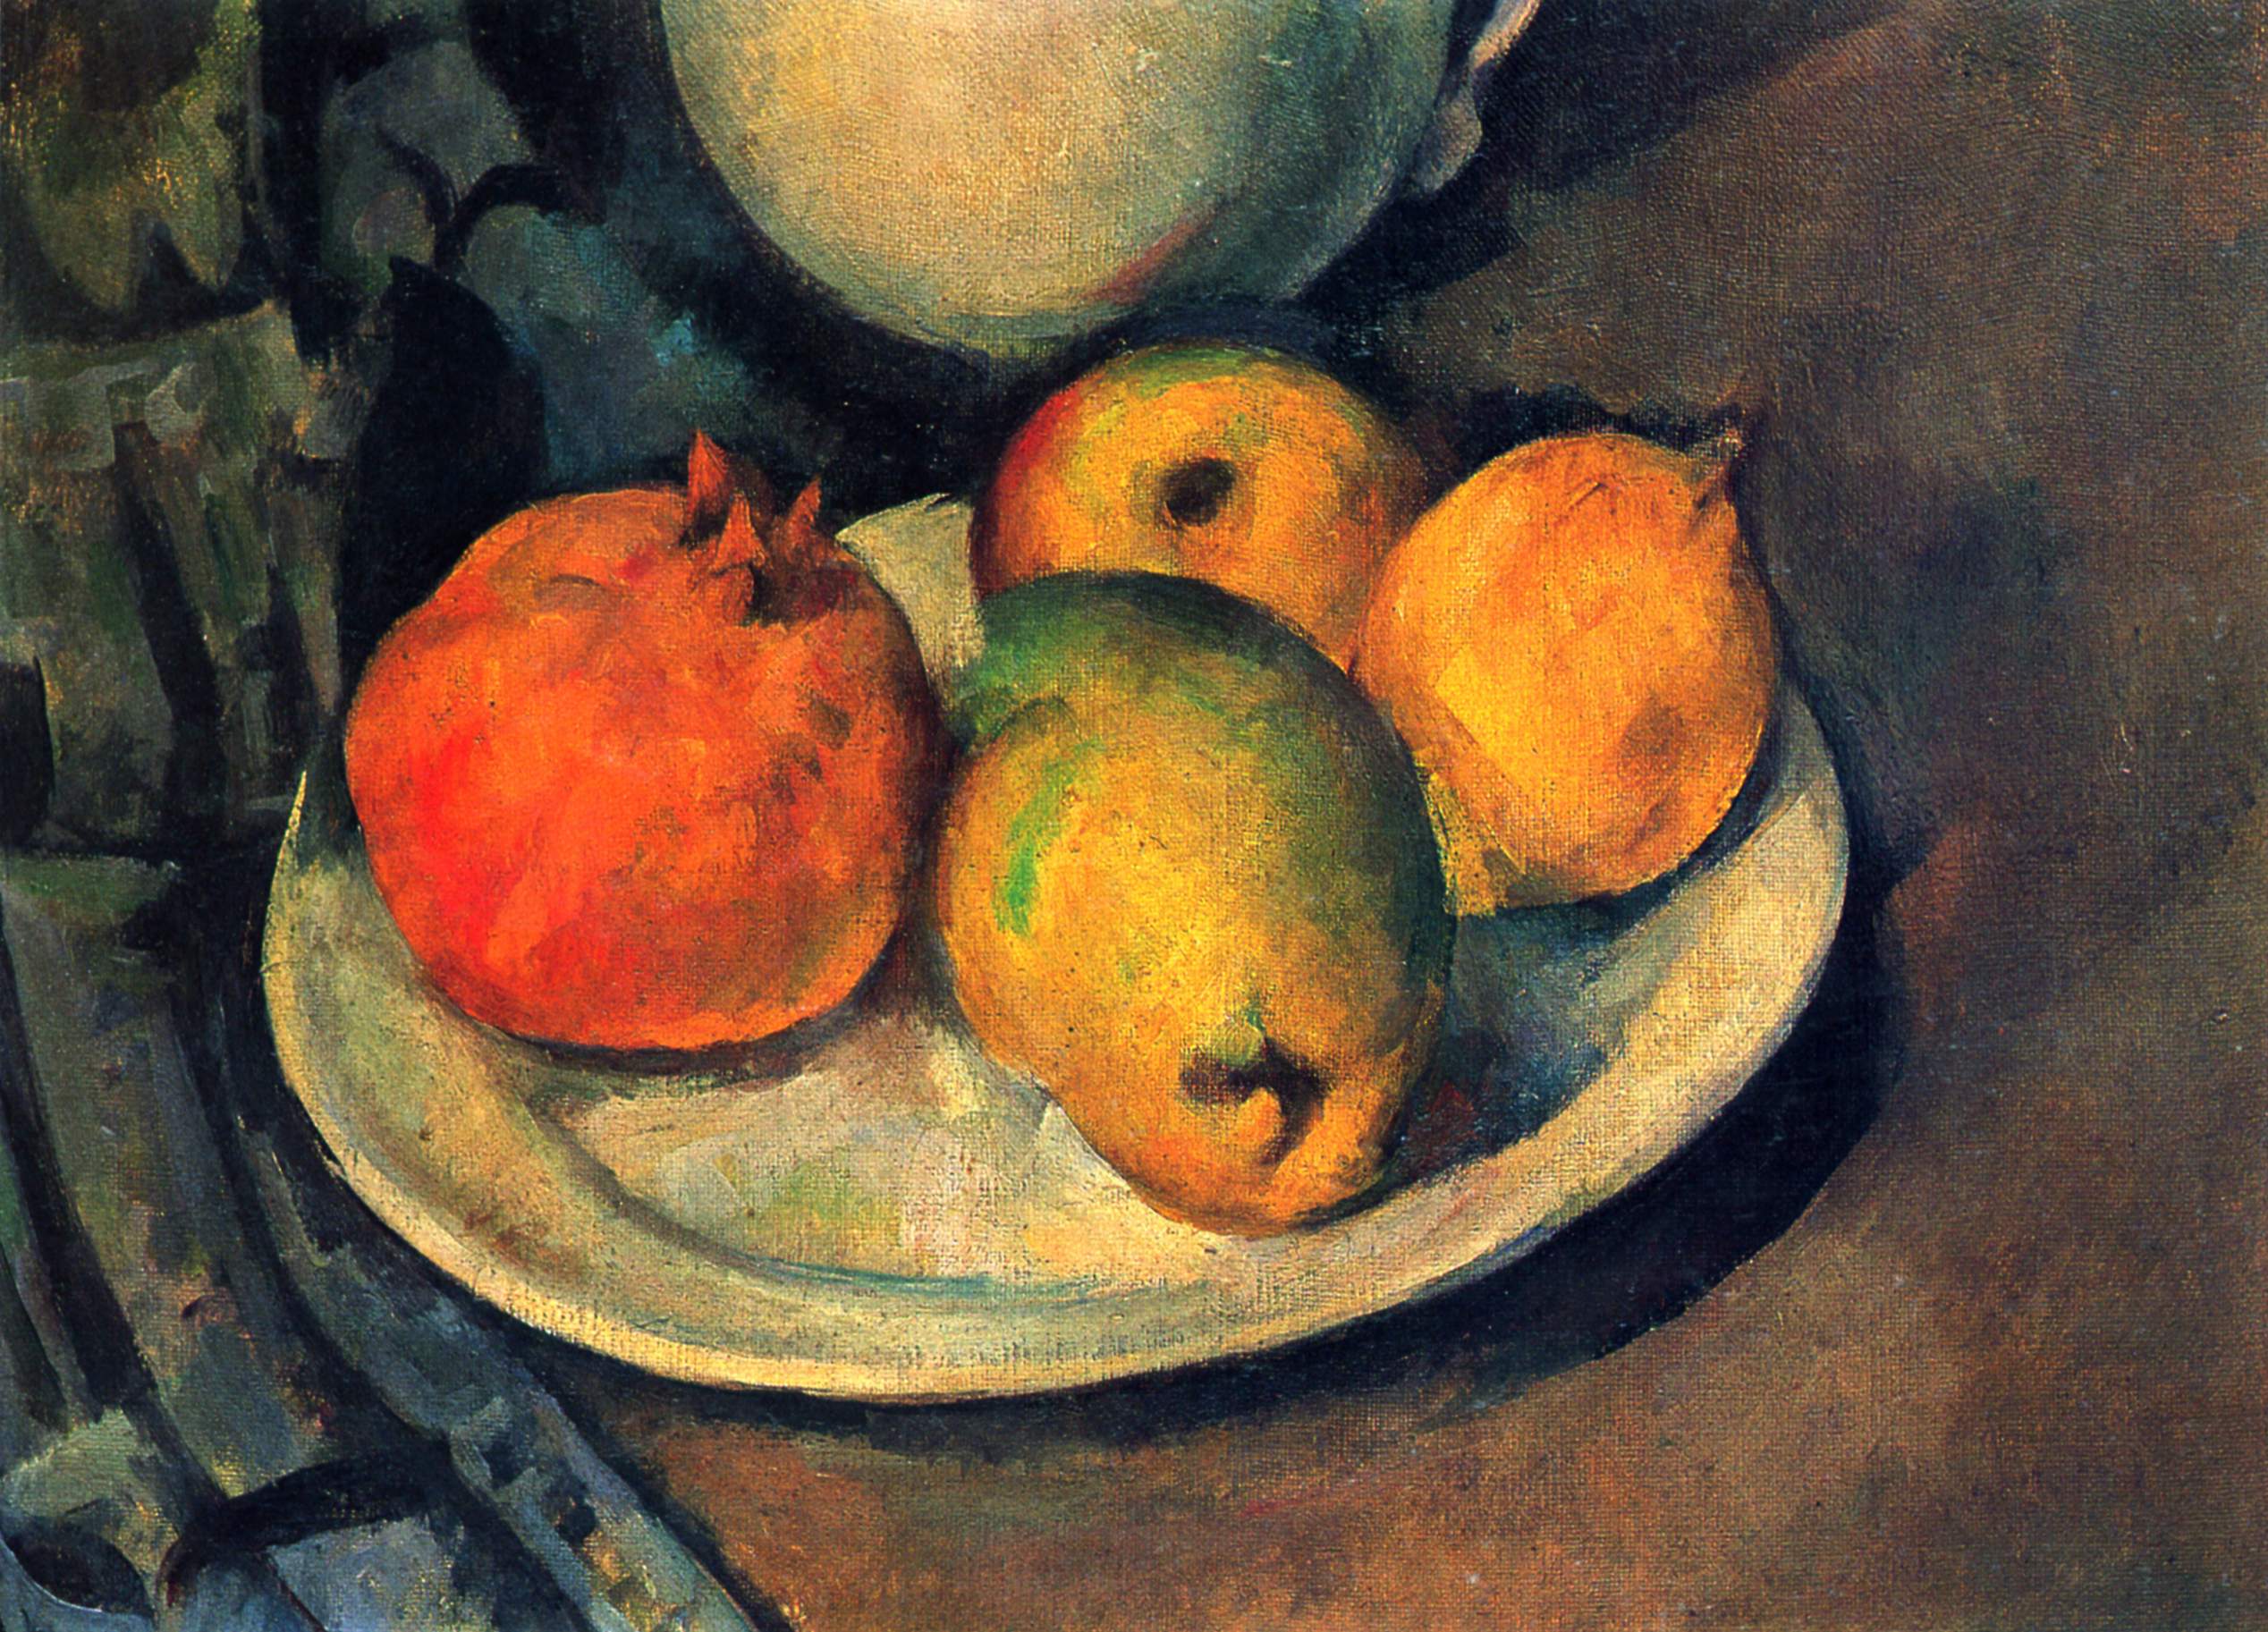 Still Life with Pomegranate and Pears by Paul Cézanne - 1890 - 27 x 36 cm private collection